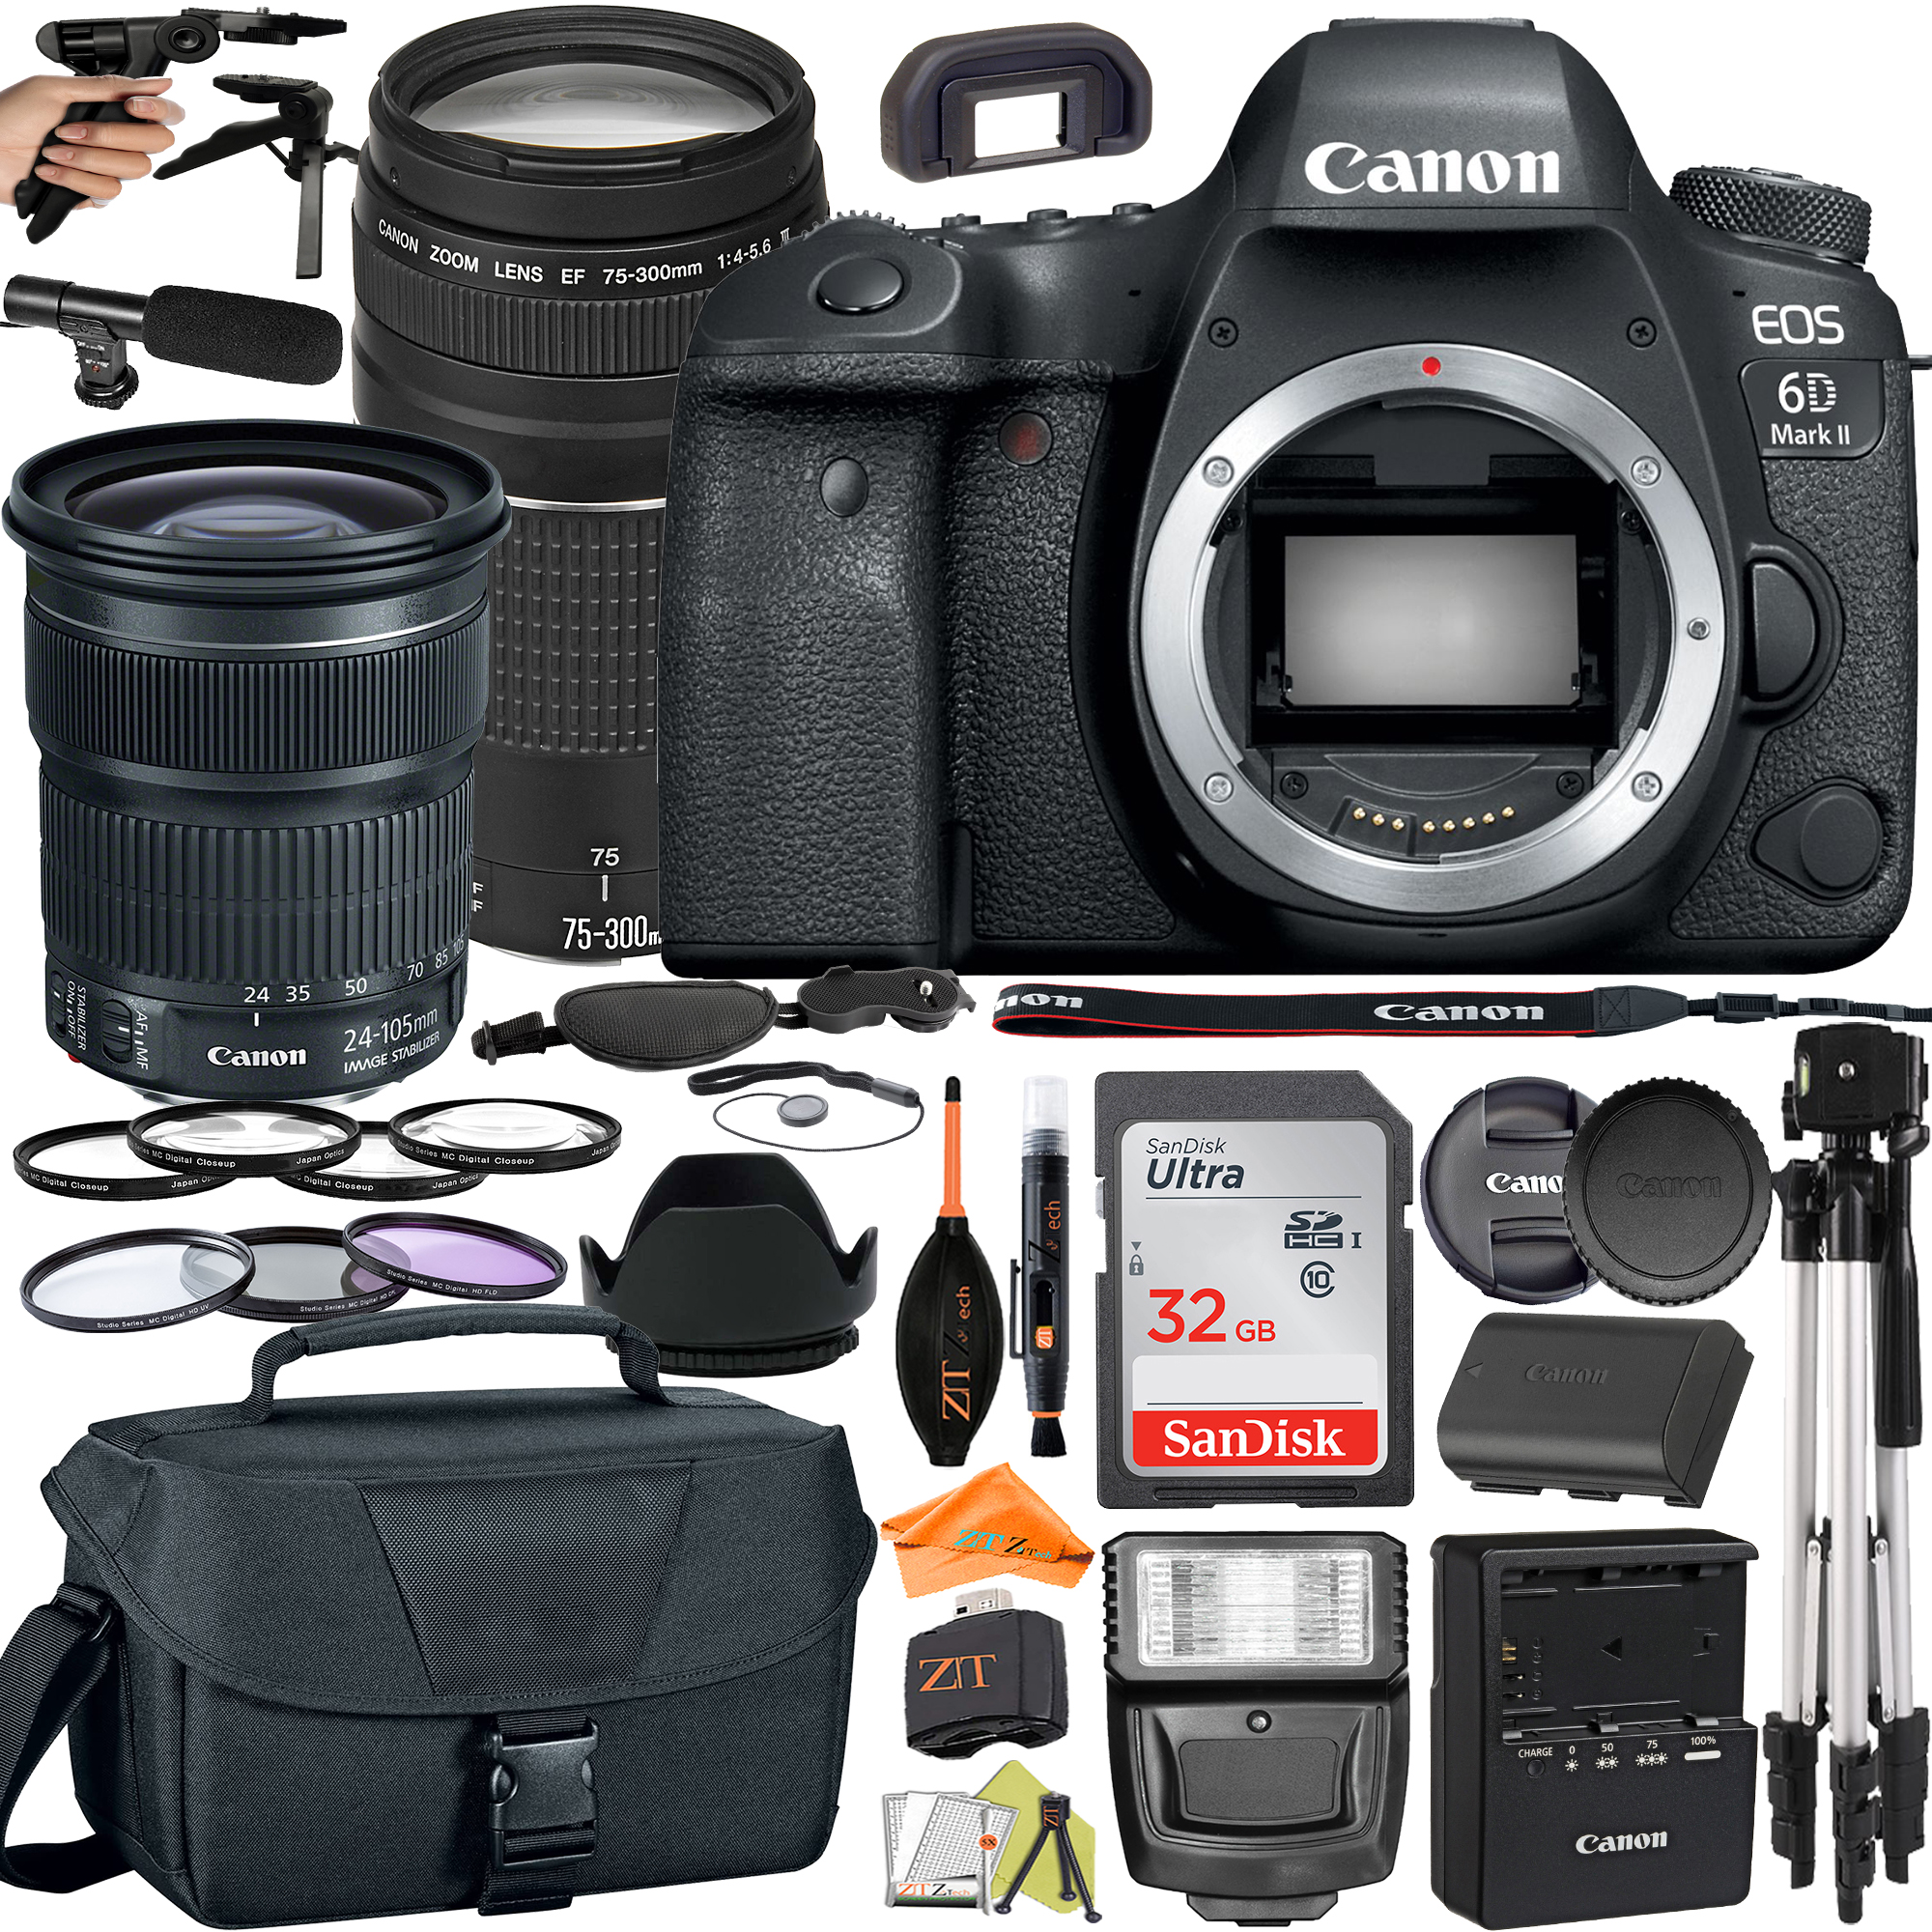 Canon EOS 6D Mark II DSLR Camera with 24-105mm + 75-300mm Lens + SanDisk 32GB + Microphone + Flash + ZeeTech Accessory Bundle